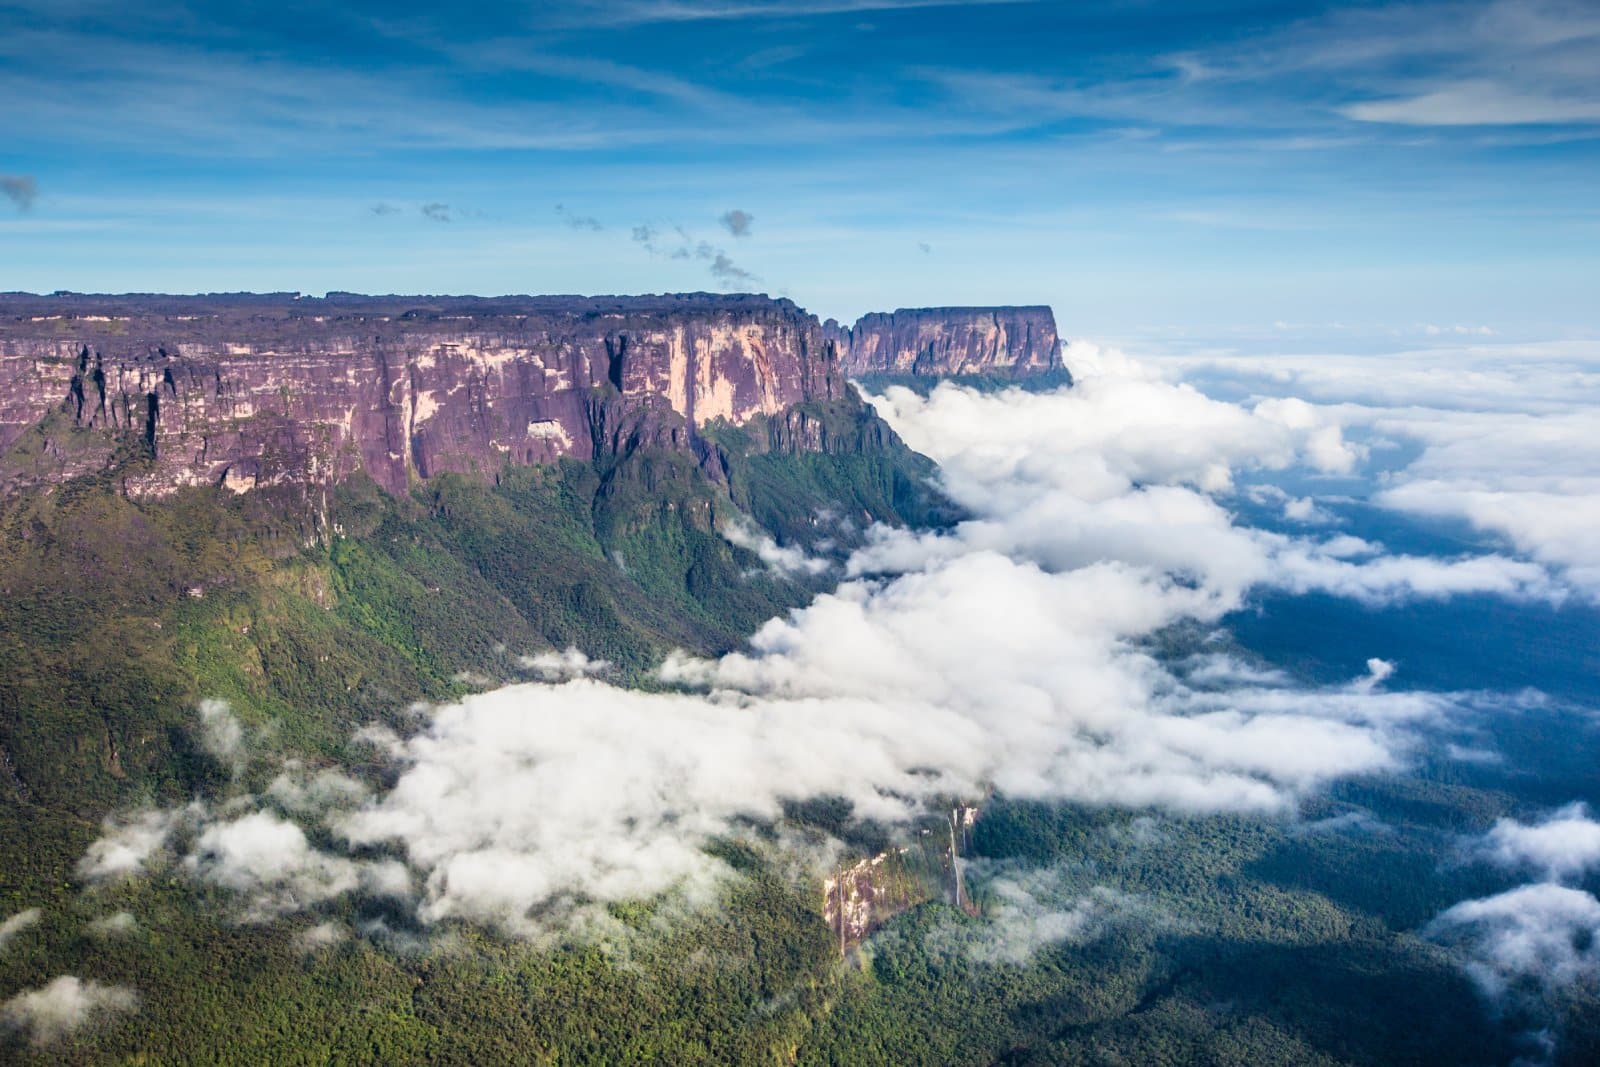 <p class="wp-caption-text">Image Credit: Shutterstock / Curioso.Photography</p>  <p>Embark on an epic trek to the summit of Mount Roraima, the towering tepui that inspired Sir Arthur Conan Doyle’s “The Lost World.” Traverse rugged terrain, cross sheer cliffs, and camp atop this otherworldly plateau for a once-in-a-lifetime adventure.</p>